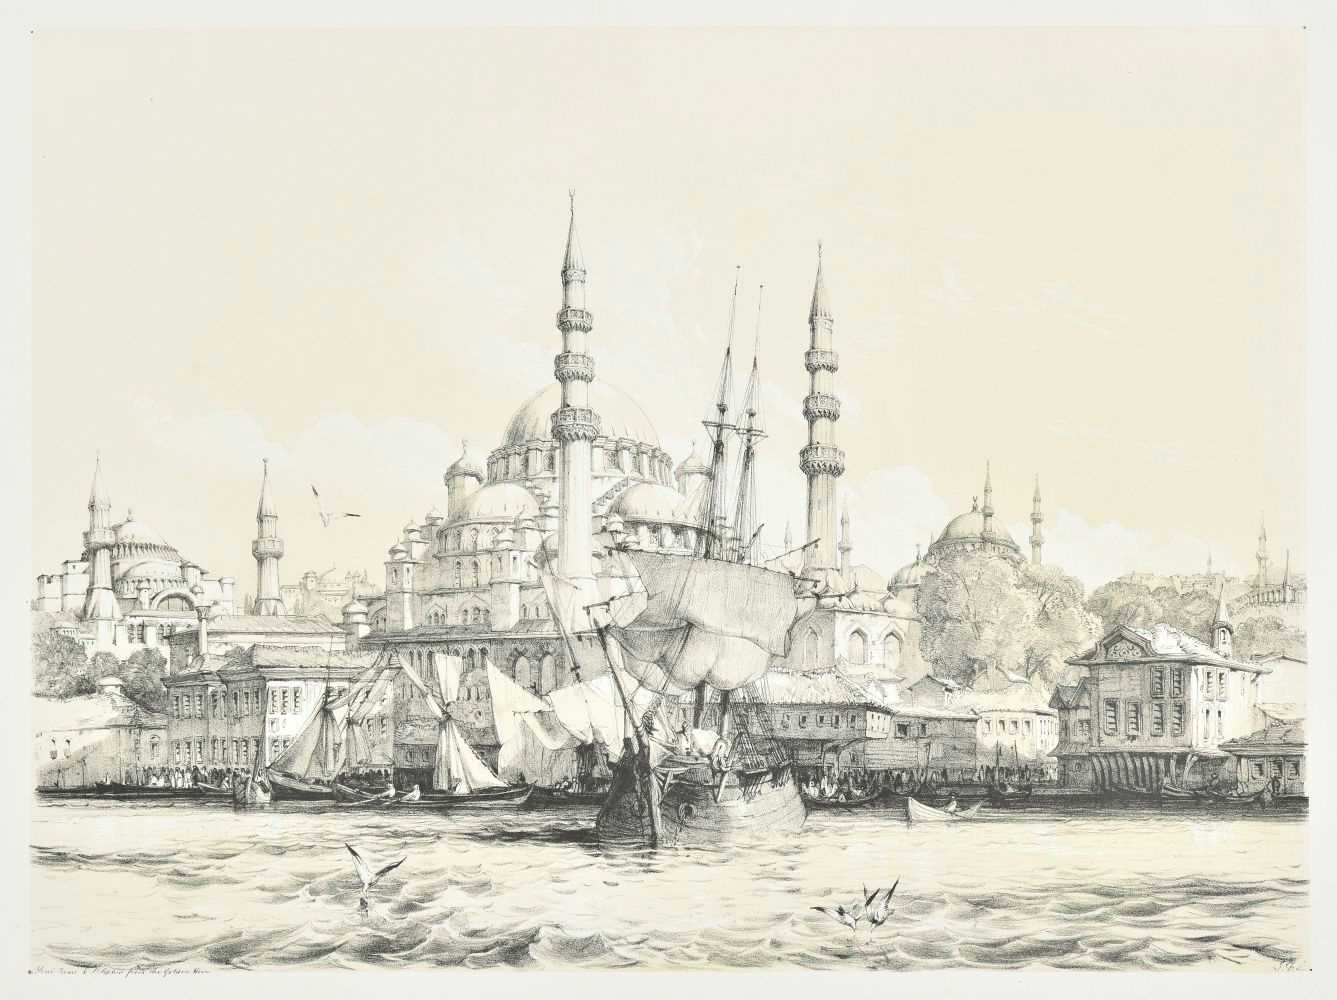 Lot 109 - Lewis (John Frederick), Illustrations of Constantinople, 1835 - 36